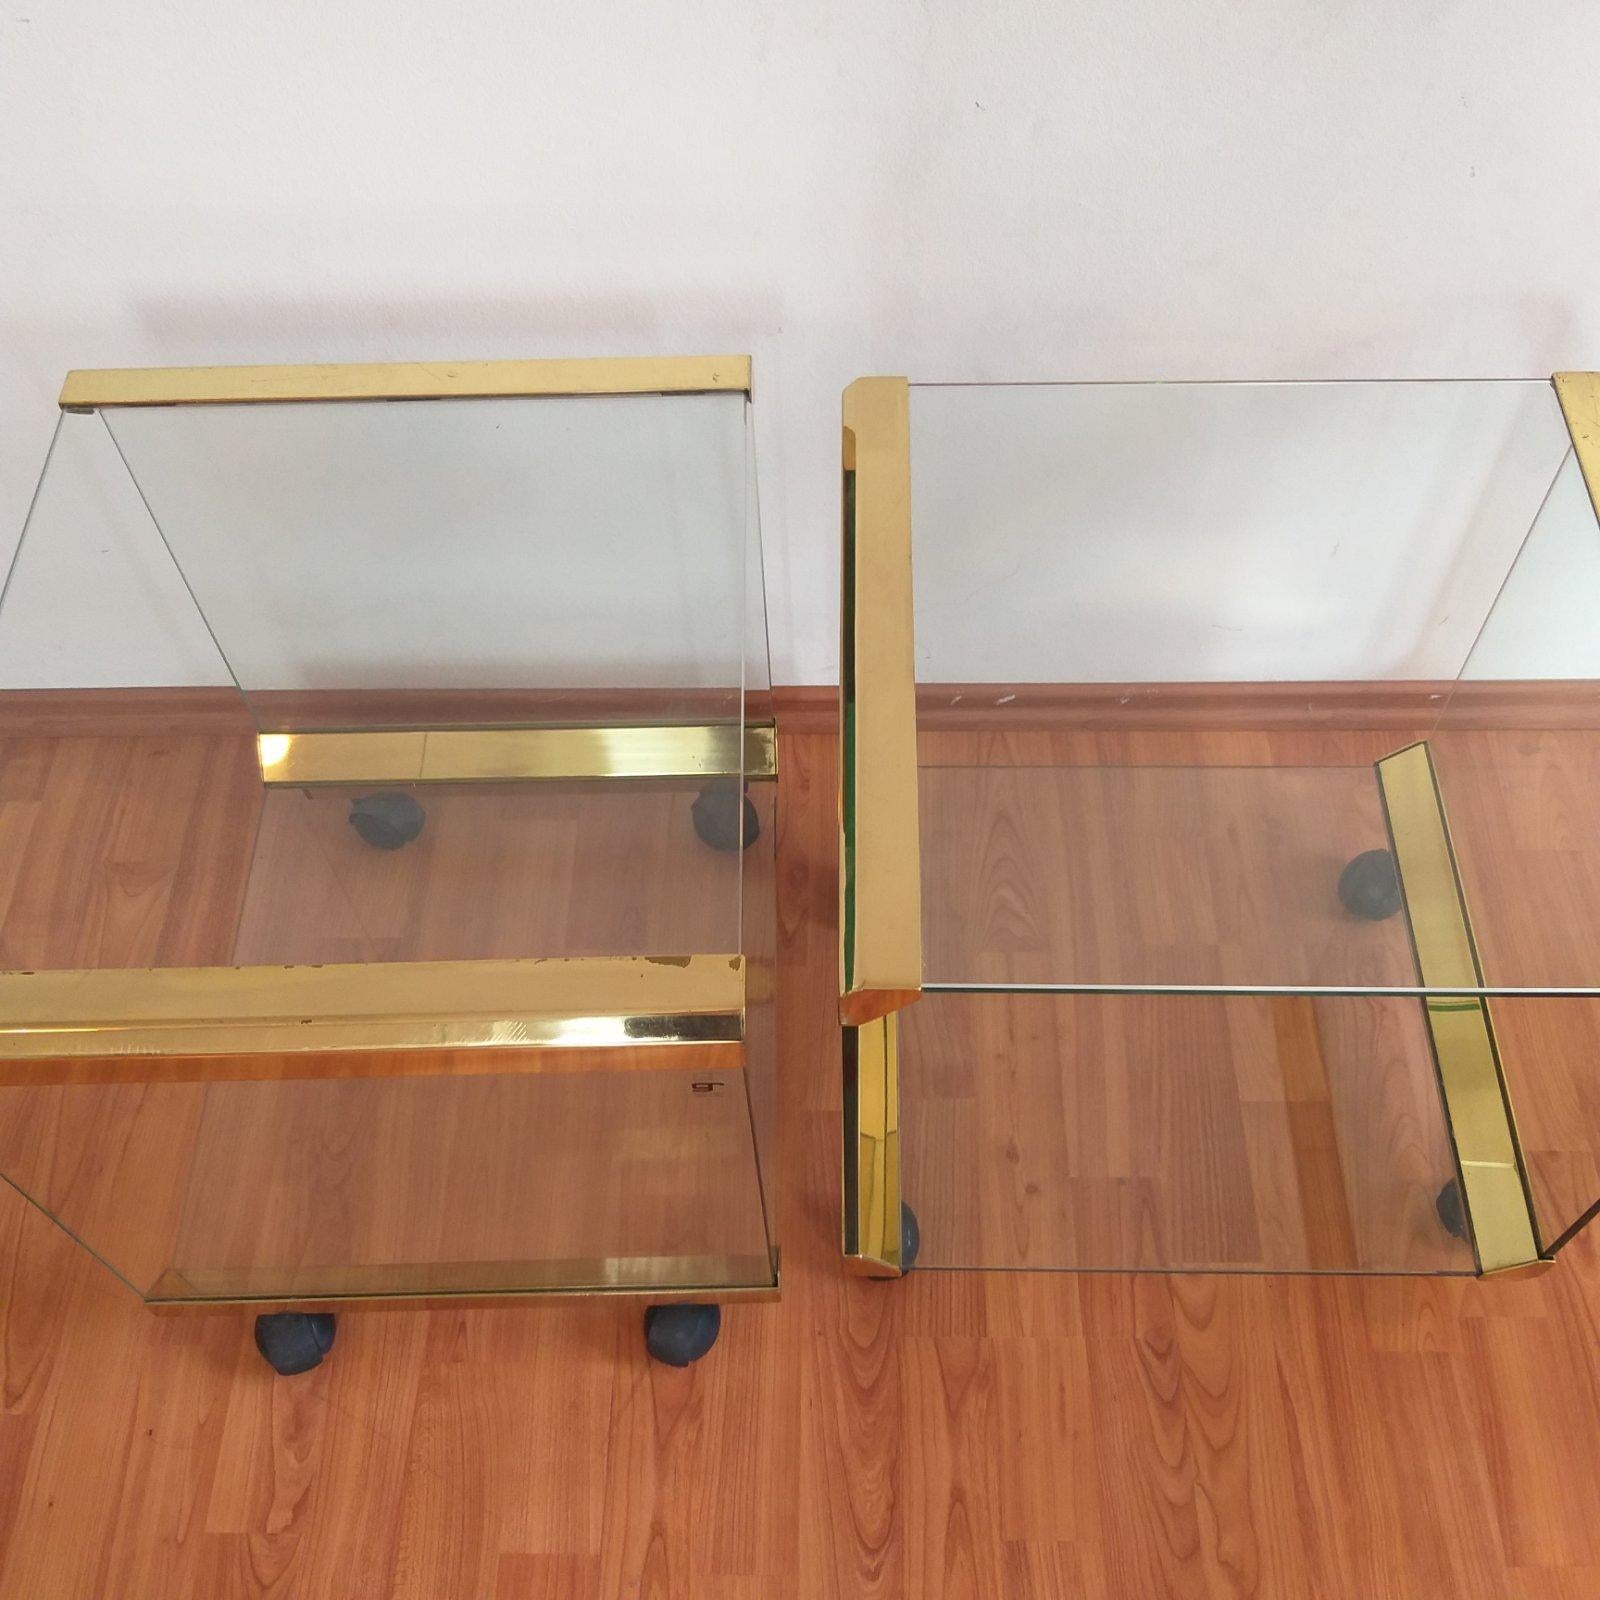 Pair of Italian brass and glass coffee or side tables.
Designed by Pierangelo Galotti for Galotti & Radice in the 70s.

Both in very good vintage condition.